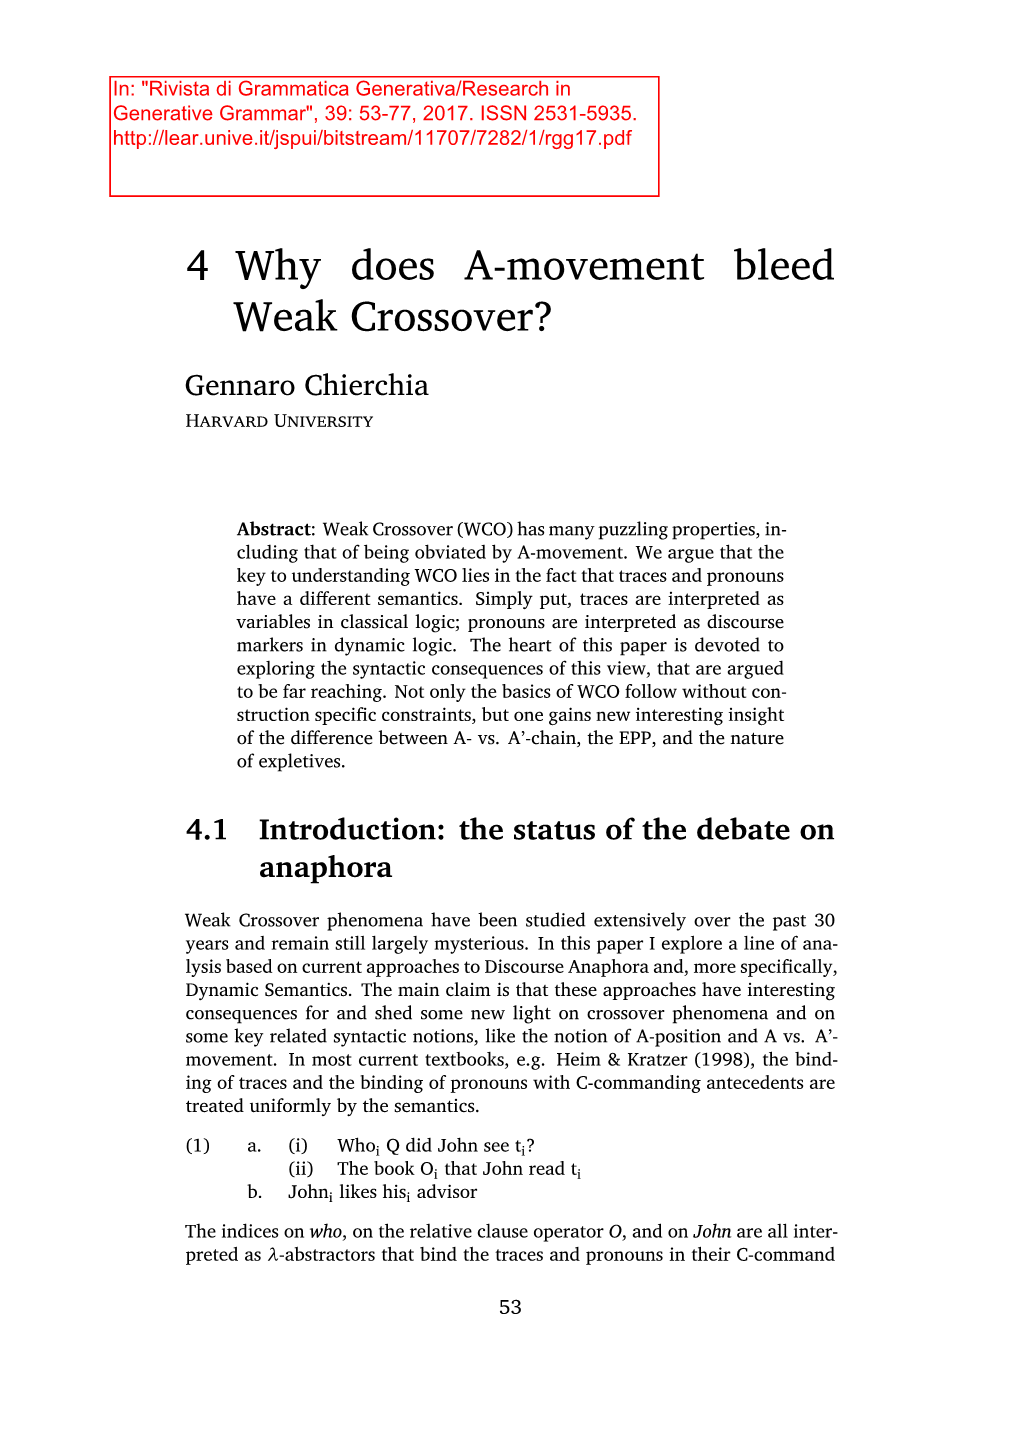 4 Why Does A-Movement Bleed Weak Crossover? Gennaro Chierchia Harvard Universit